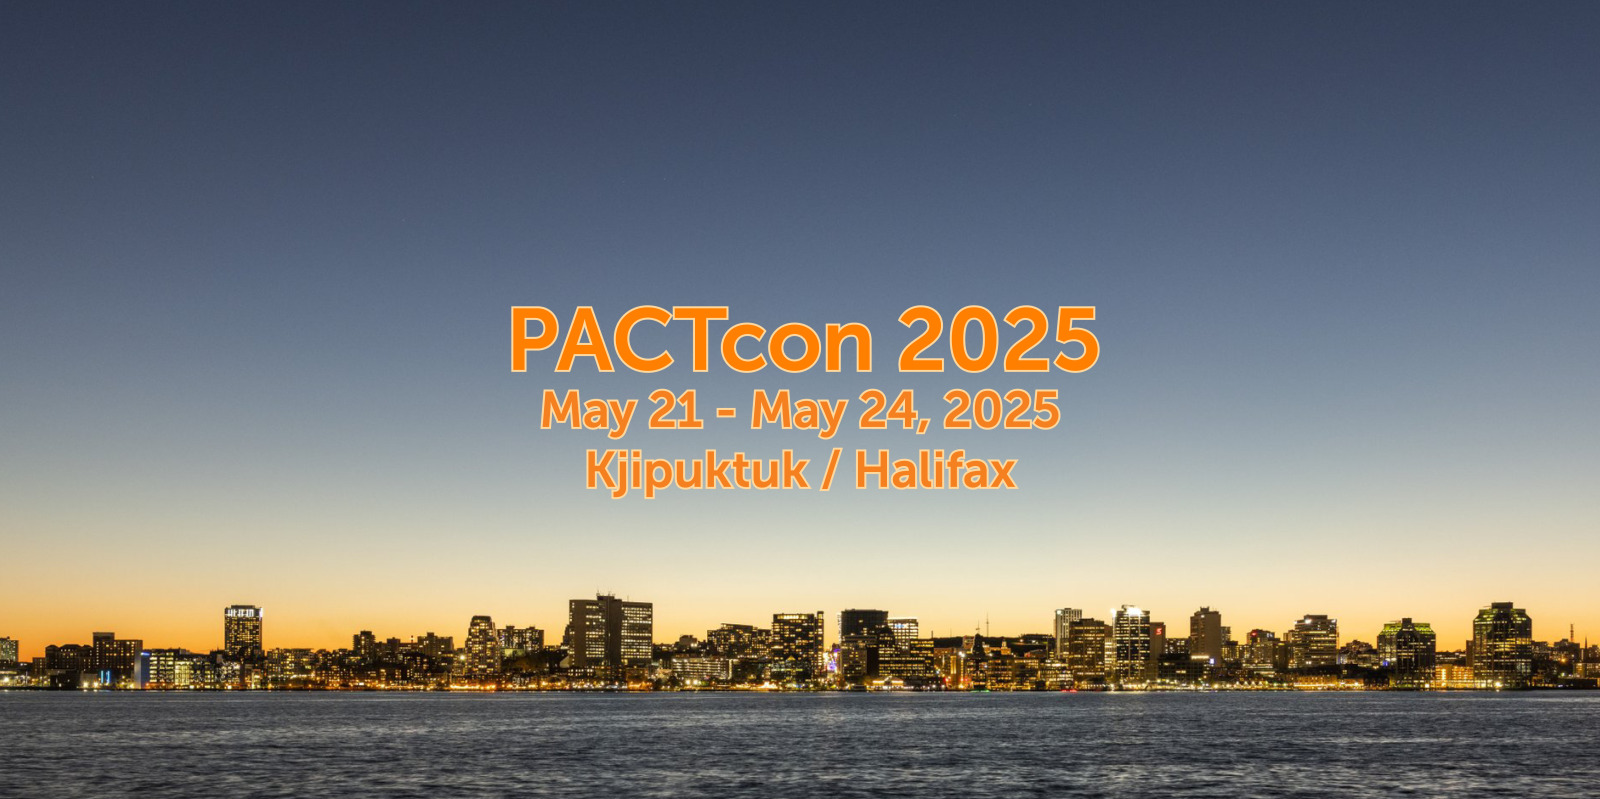 PACTcon 2025: May 21 to May 24, 2025 picture